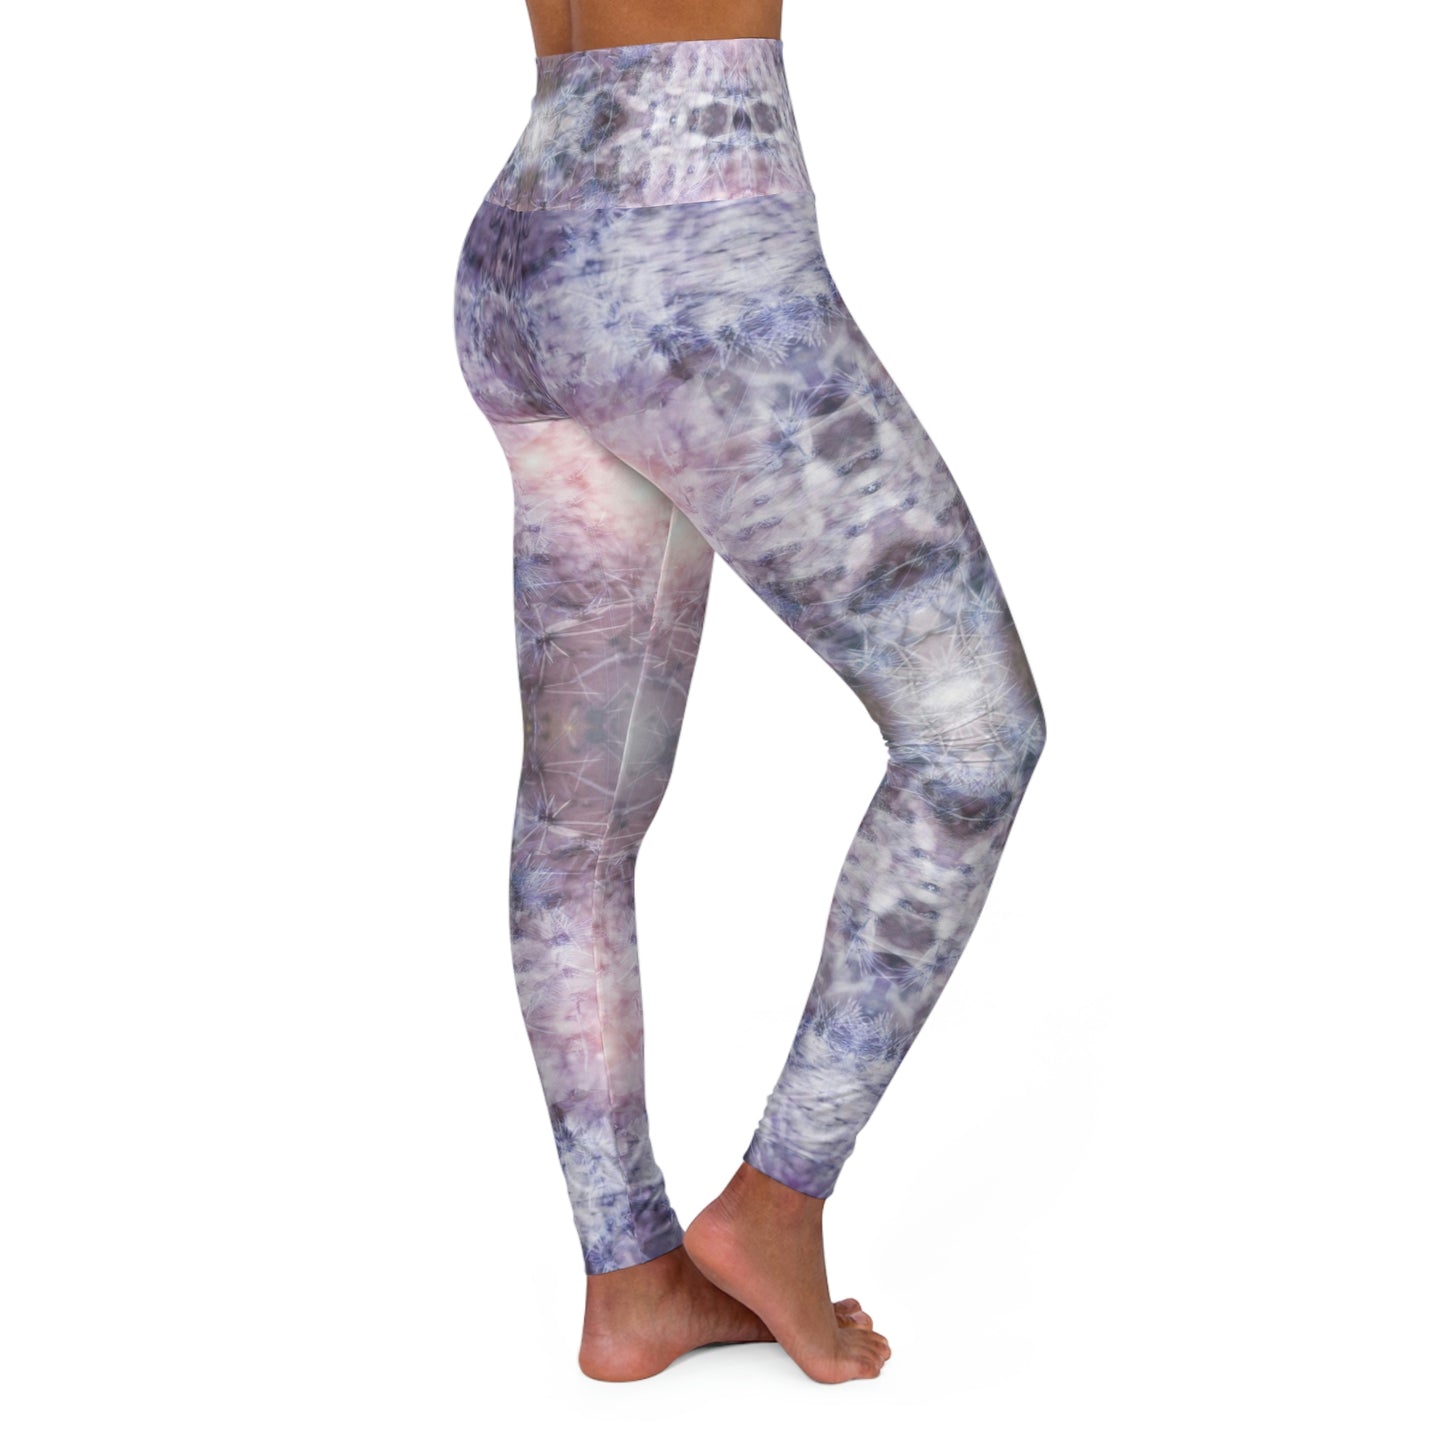 Cacti Connection High Waisted Yoga Leggings in color Dream